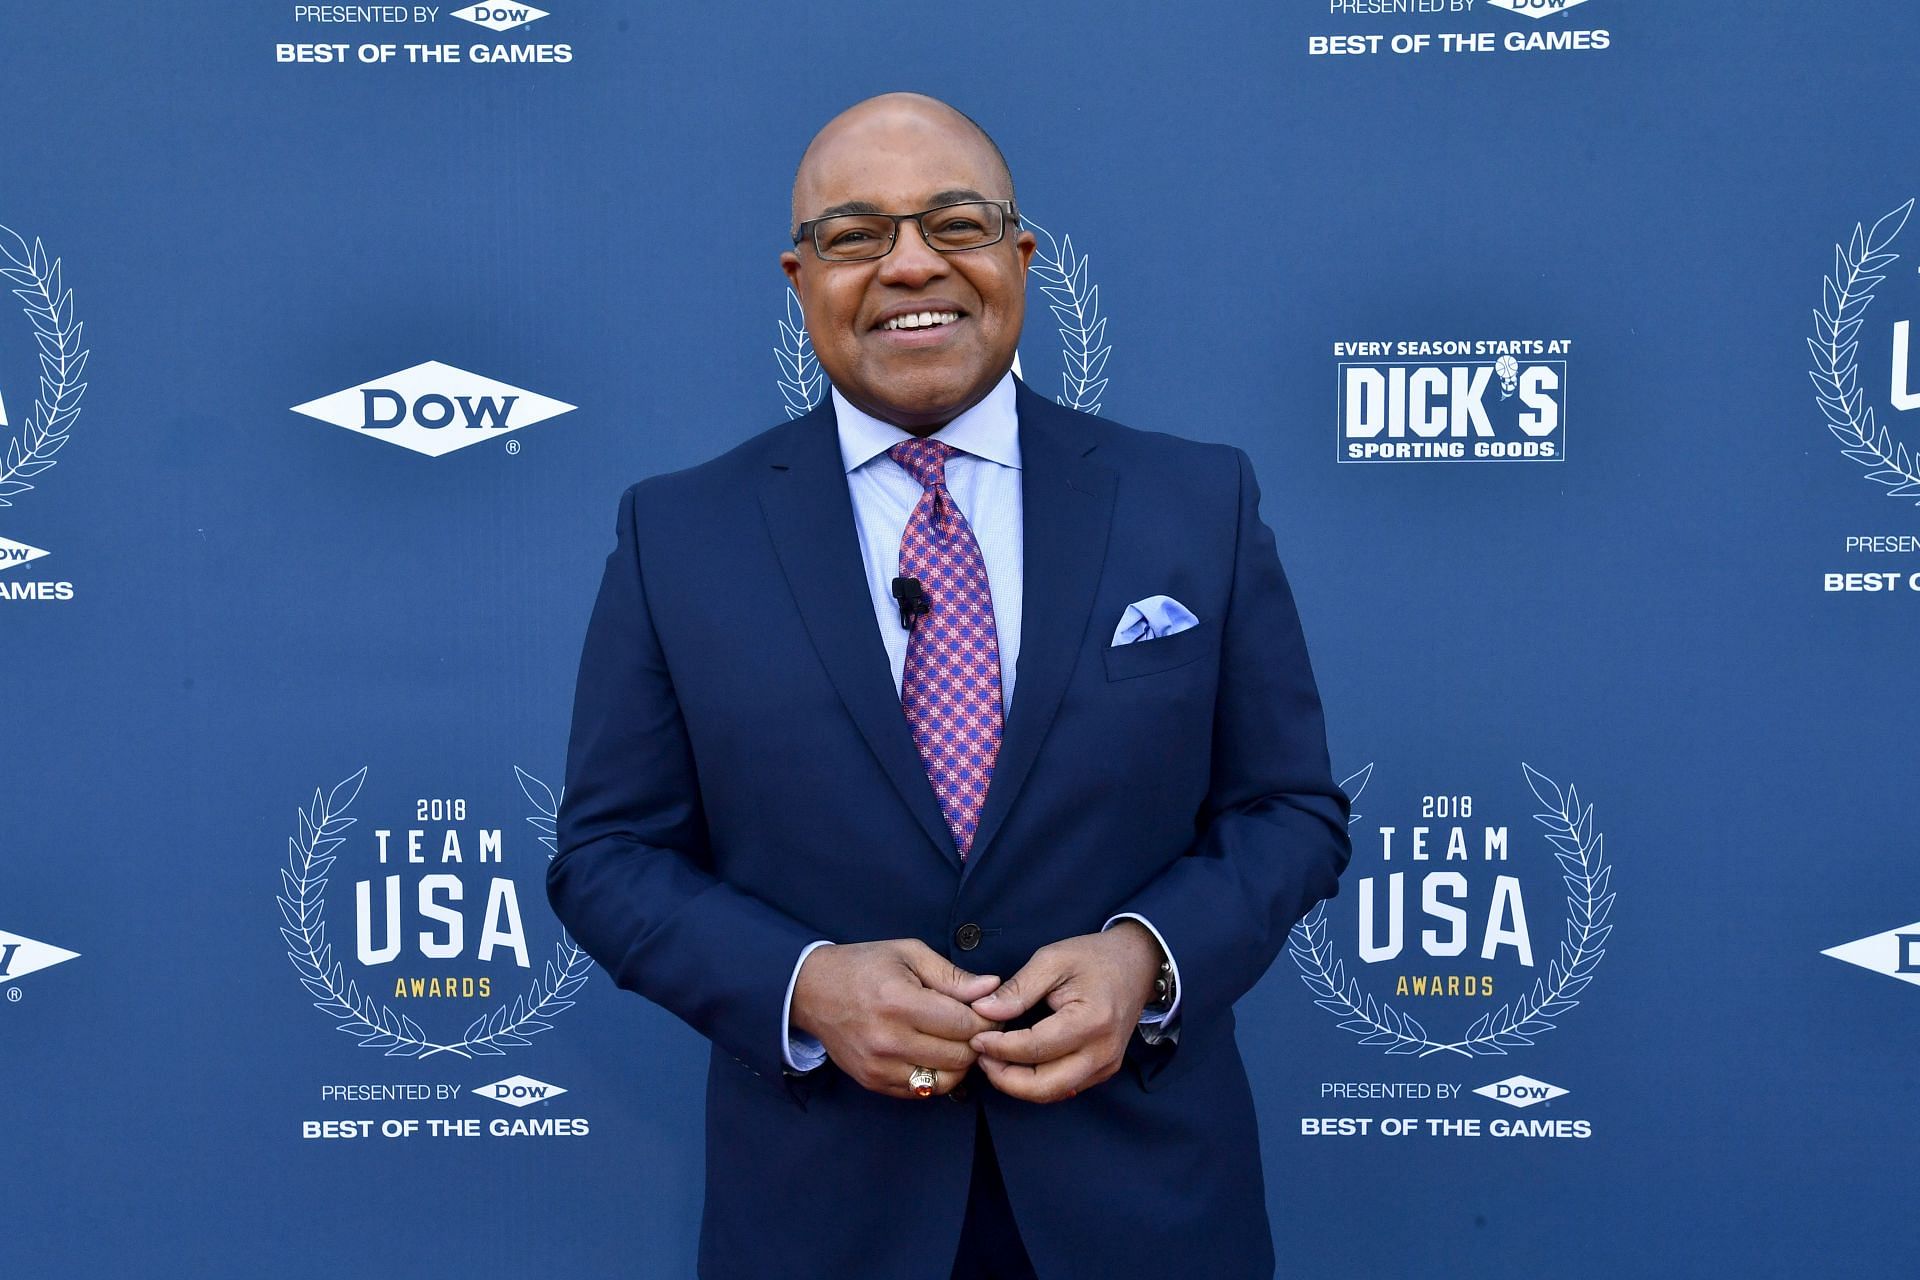 NFL play by play announcer Mike Tirico